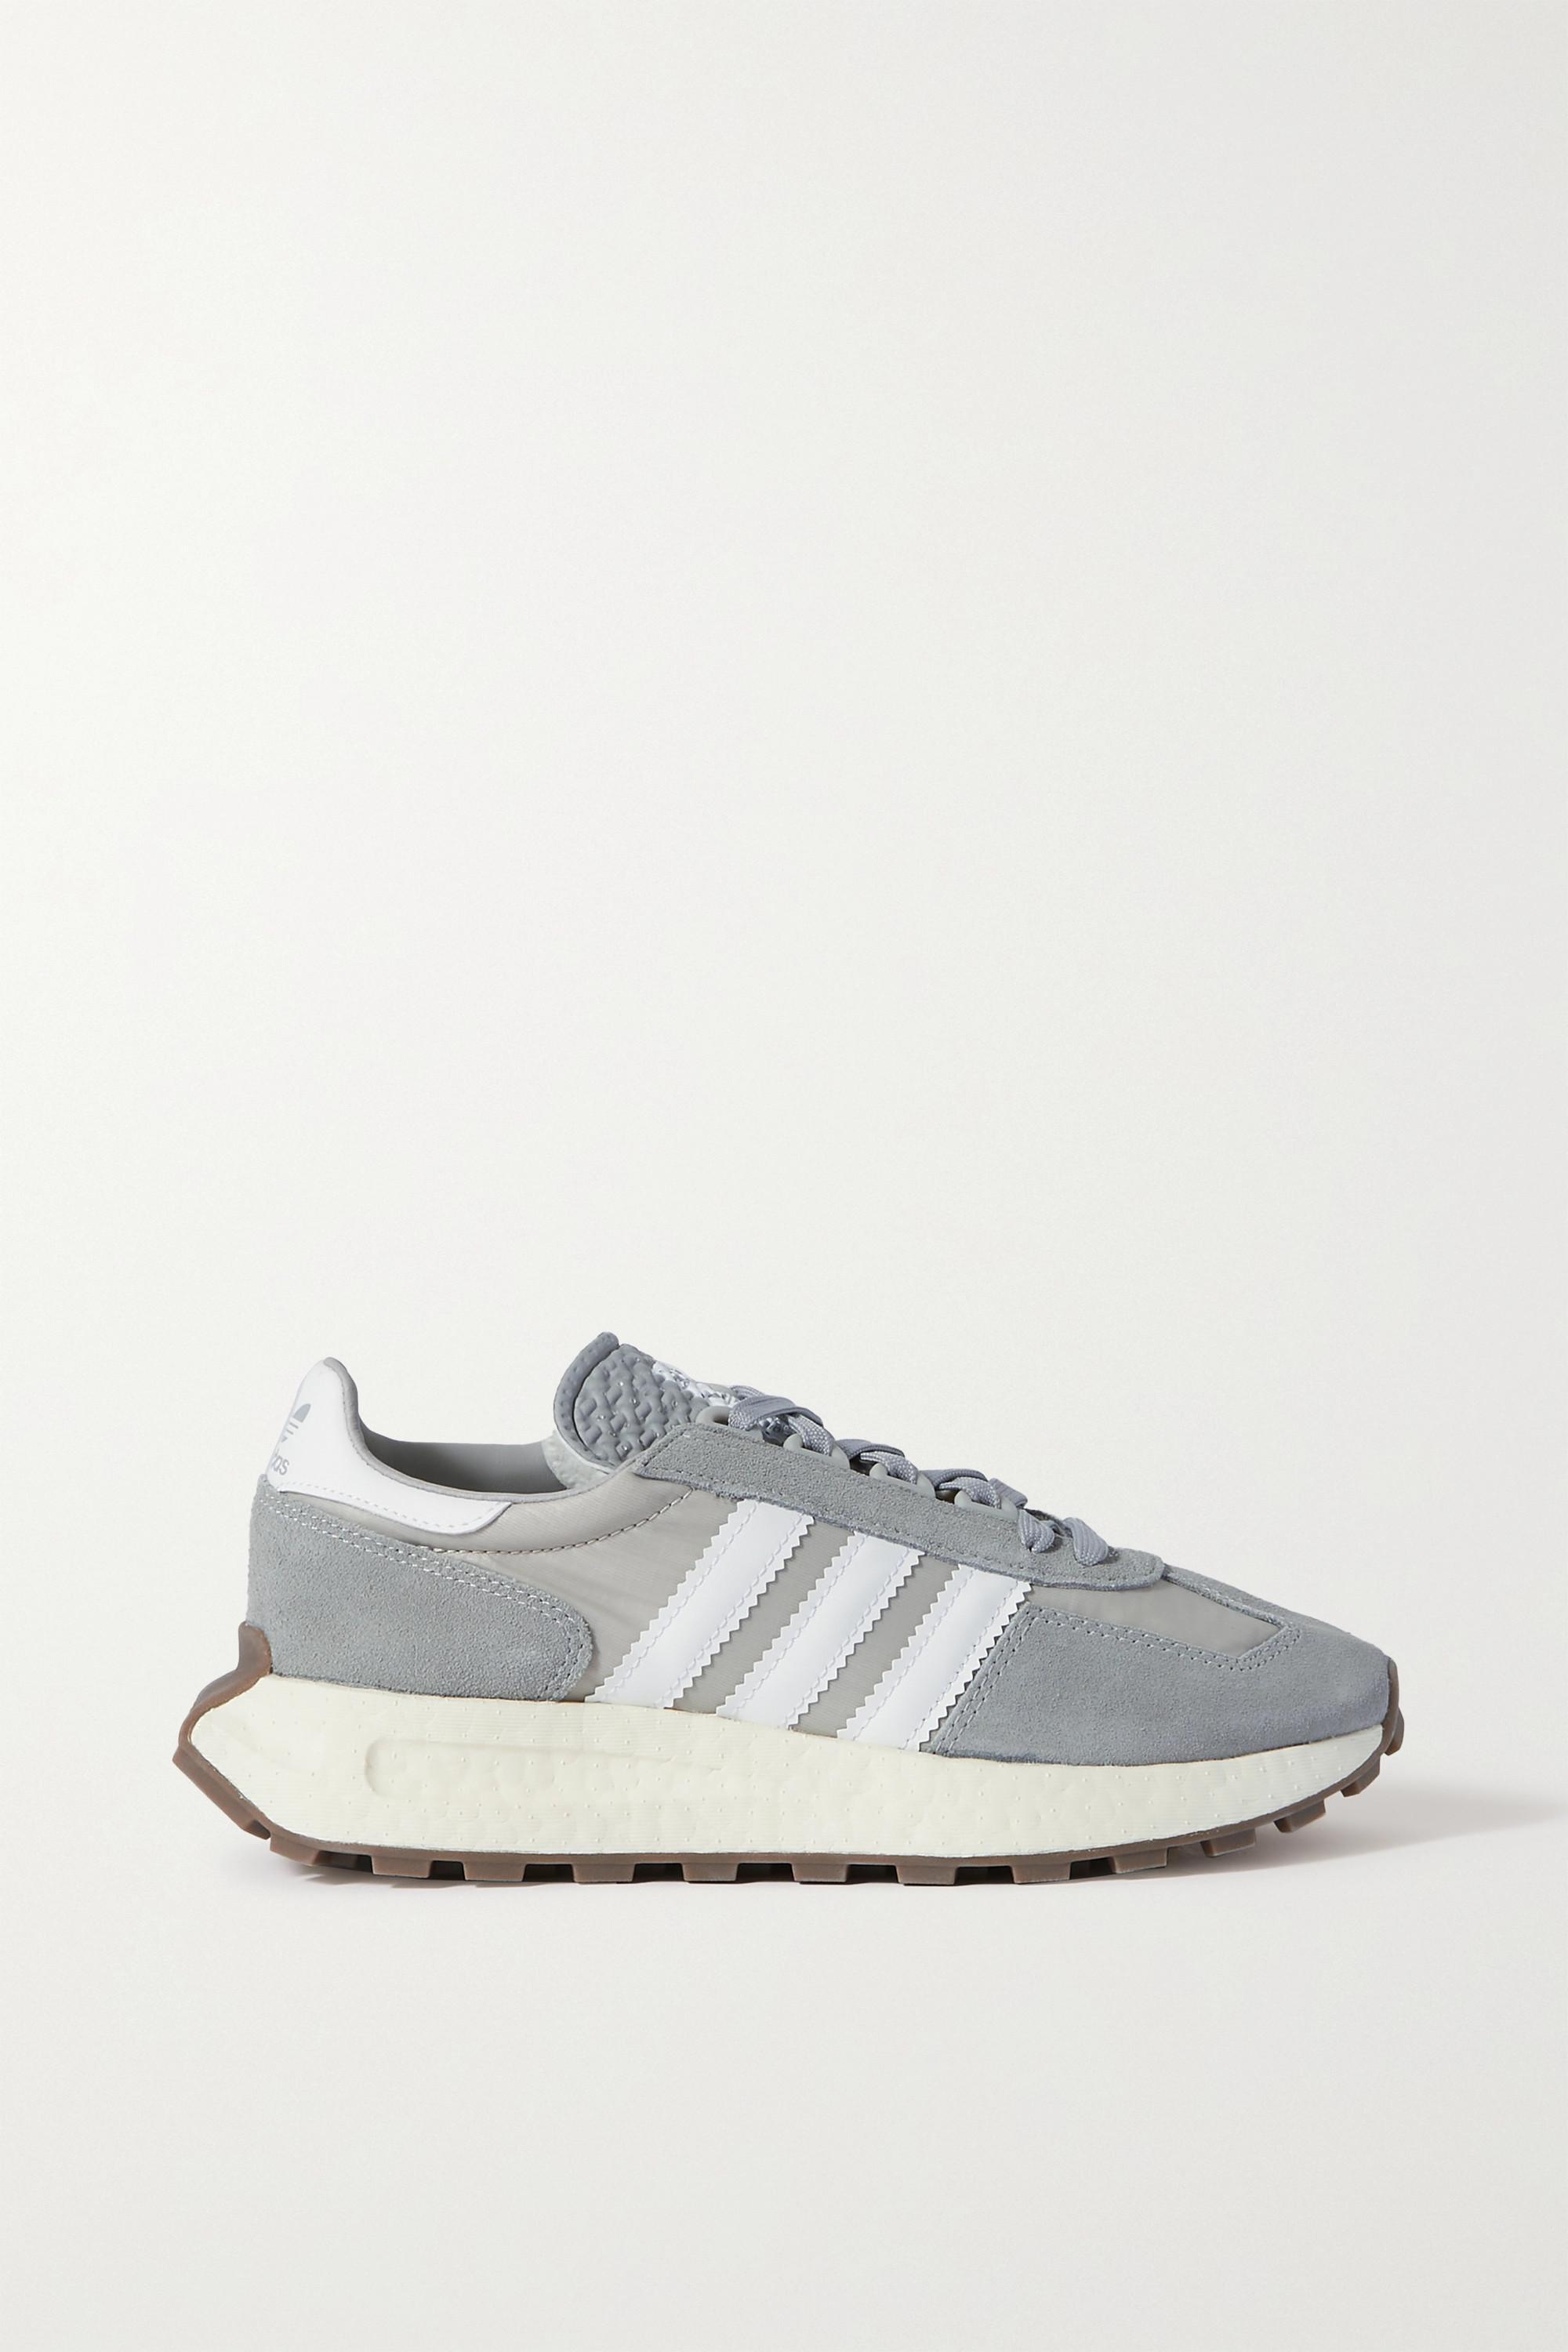 adidas Originals Retropy E5 Leather-trimmed Suede And Nylon Sneakers in Grey | Lyst